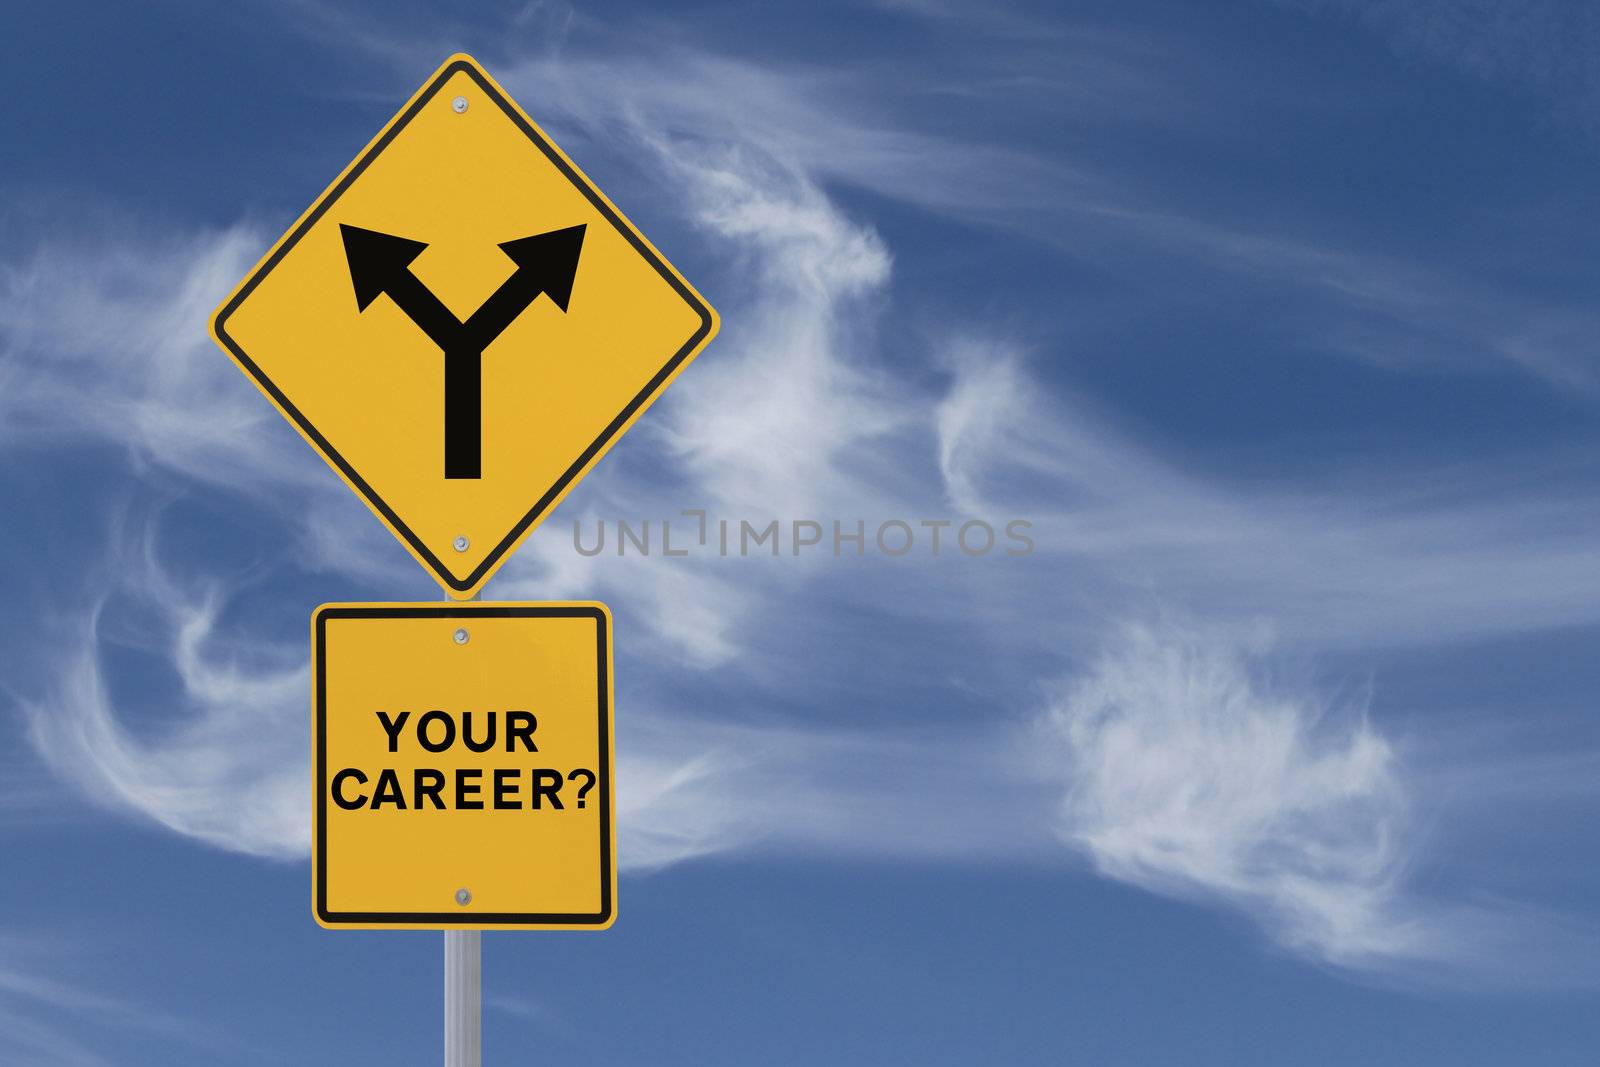 Road sign on the need for a career direction or decision (on a blue sky background)